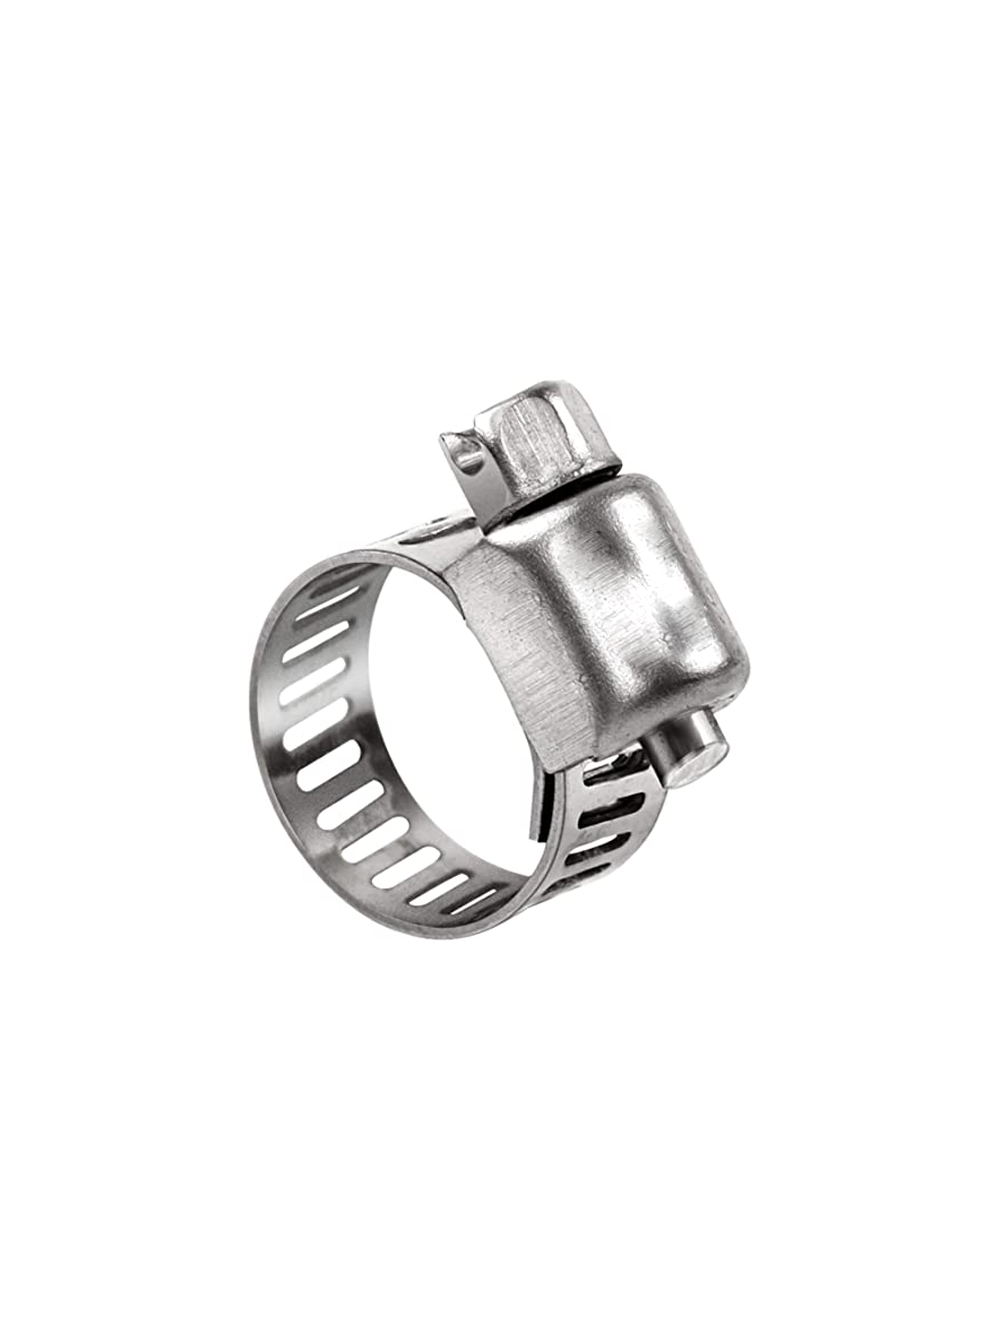 Stainless Steel Hose Clamp (3/16 - 5/16)